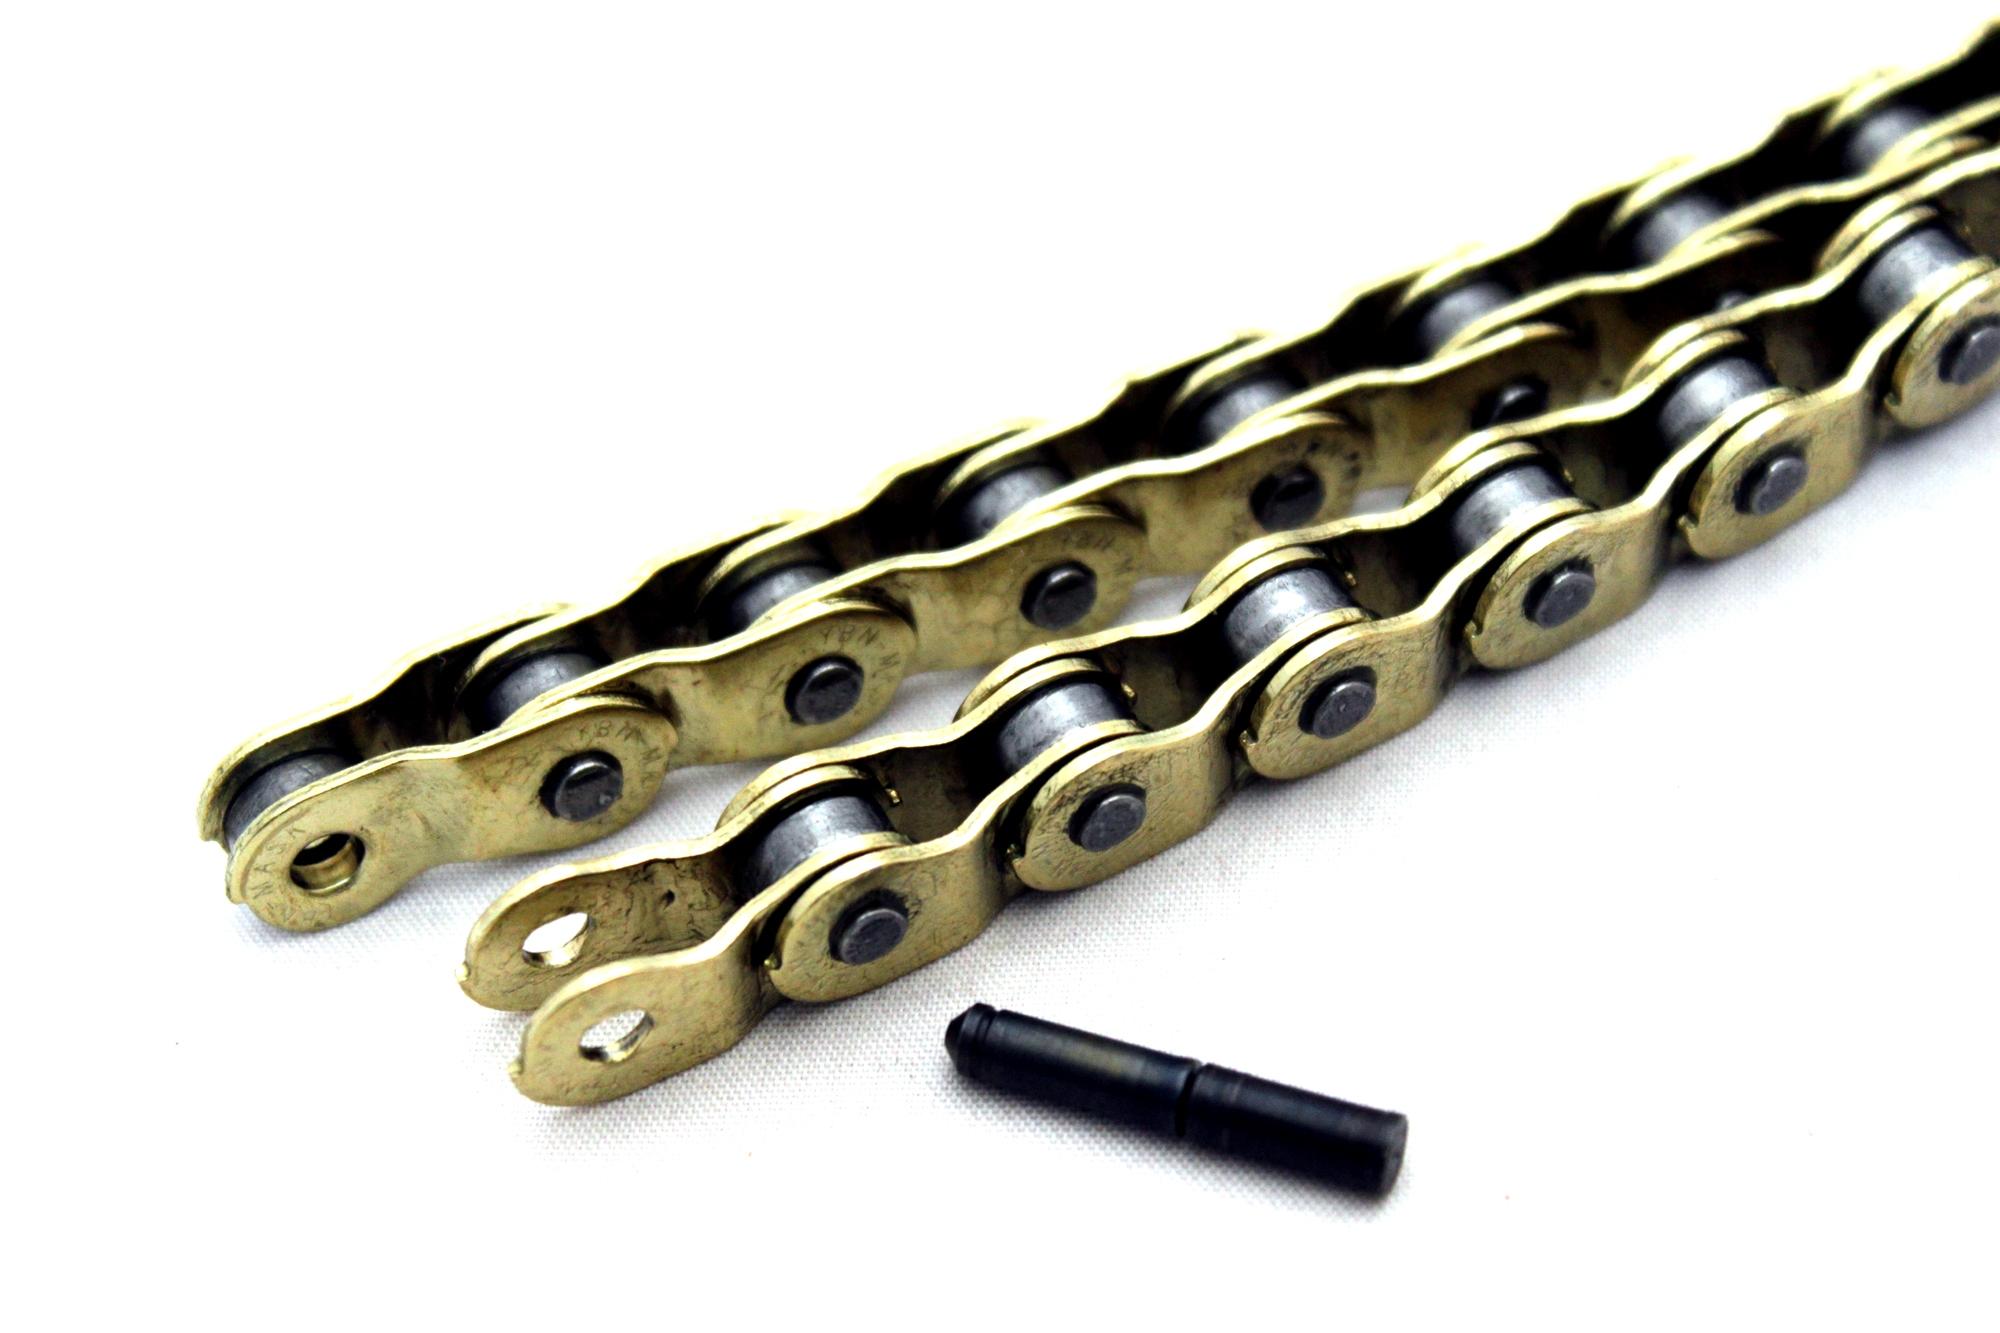 Point Half Link MK 918 Bicycle Chain 1/2 x 1/8 102 Links